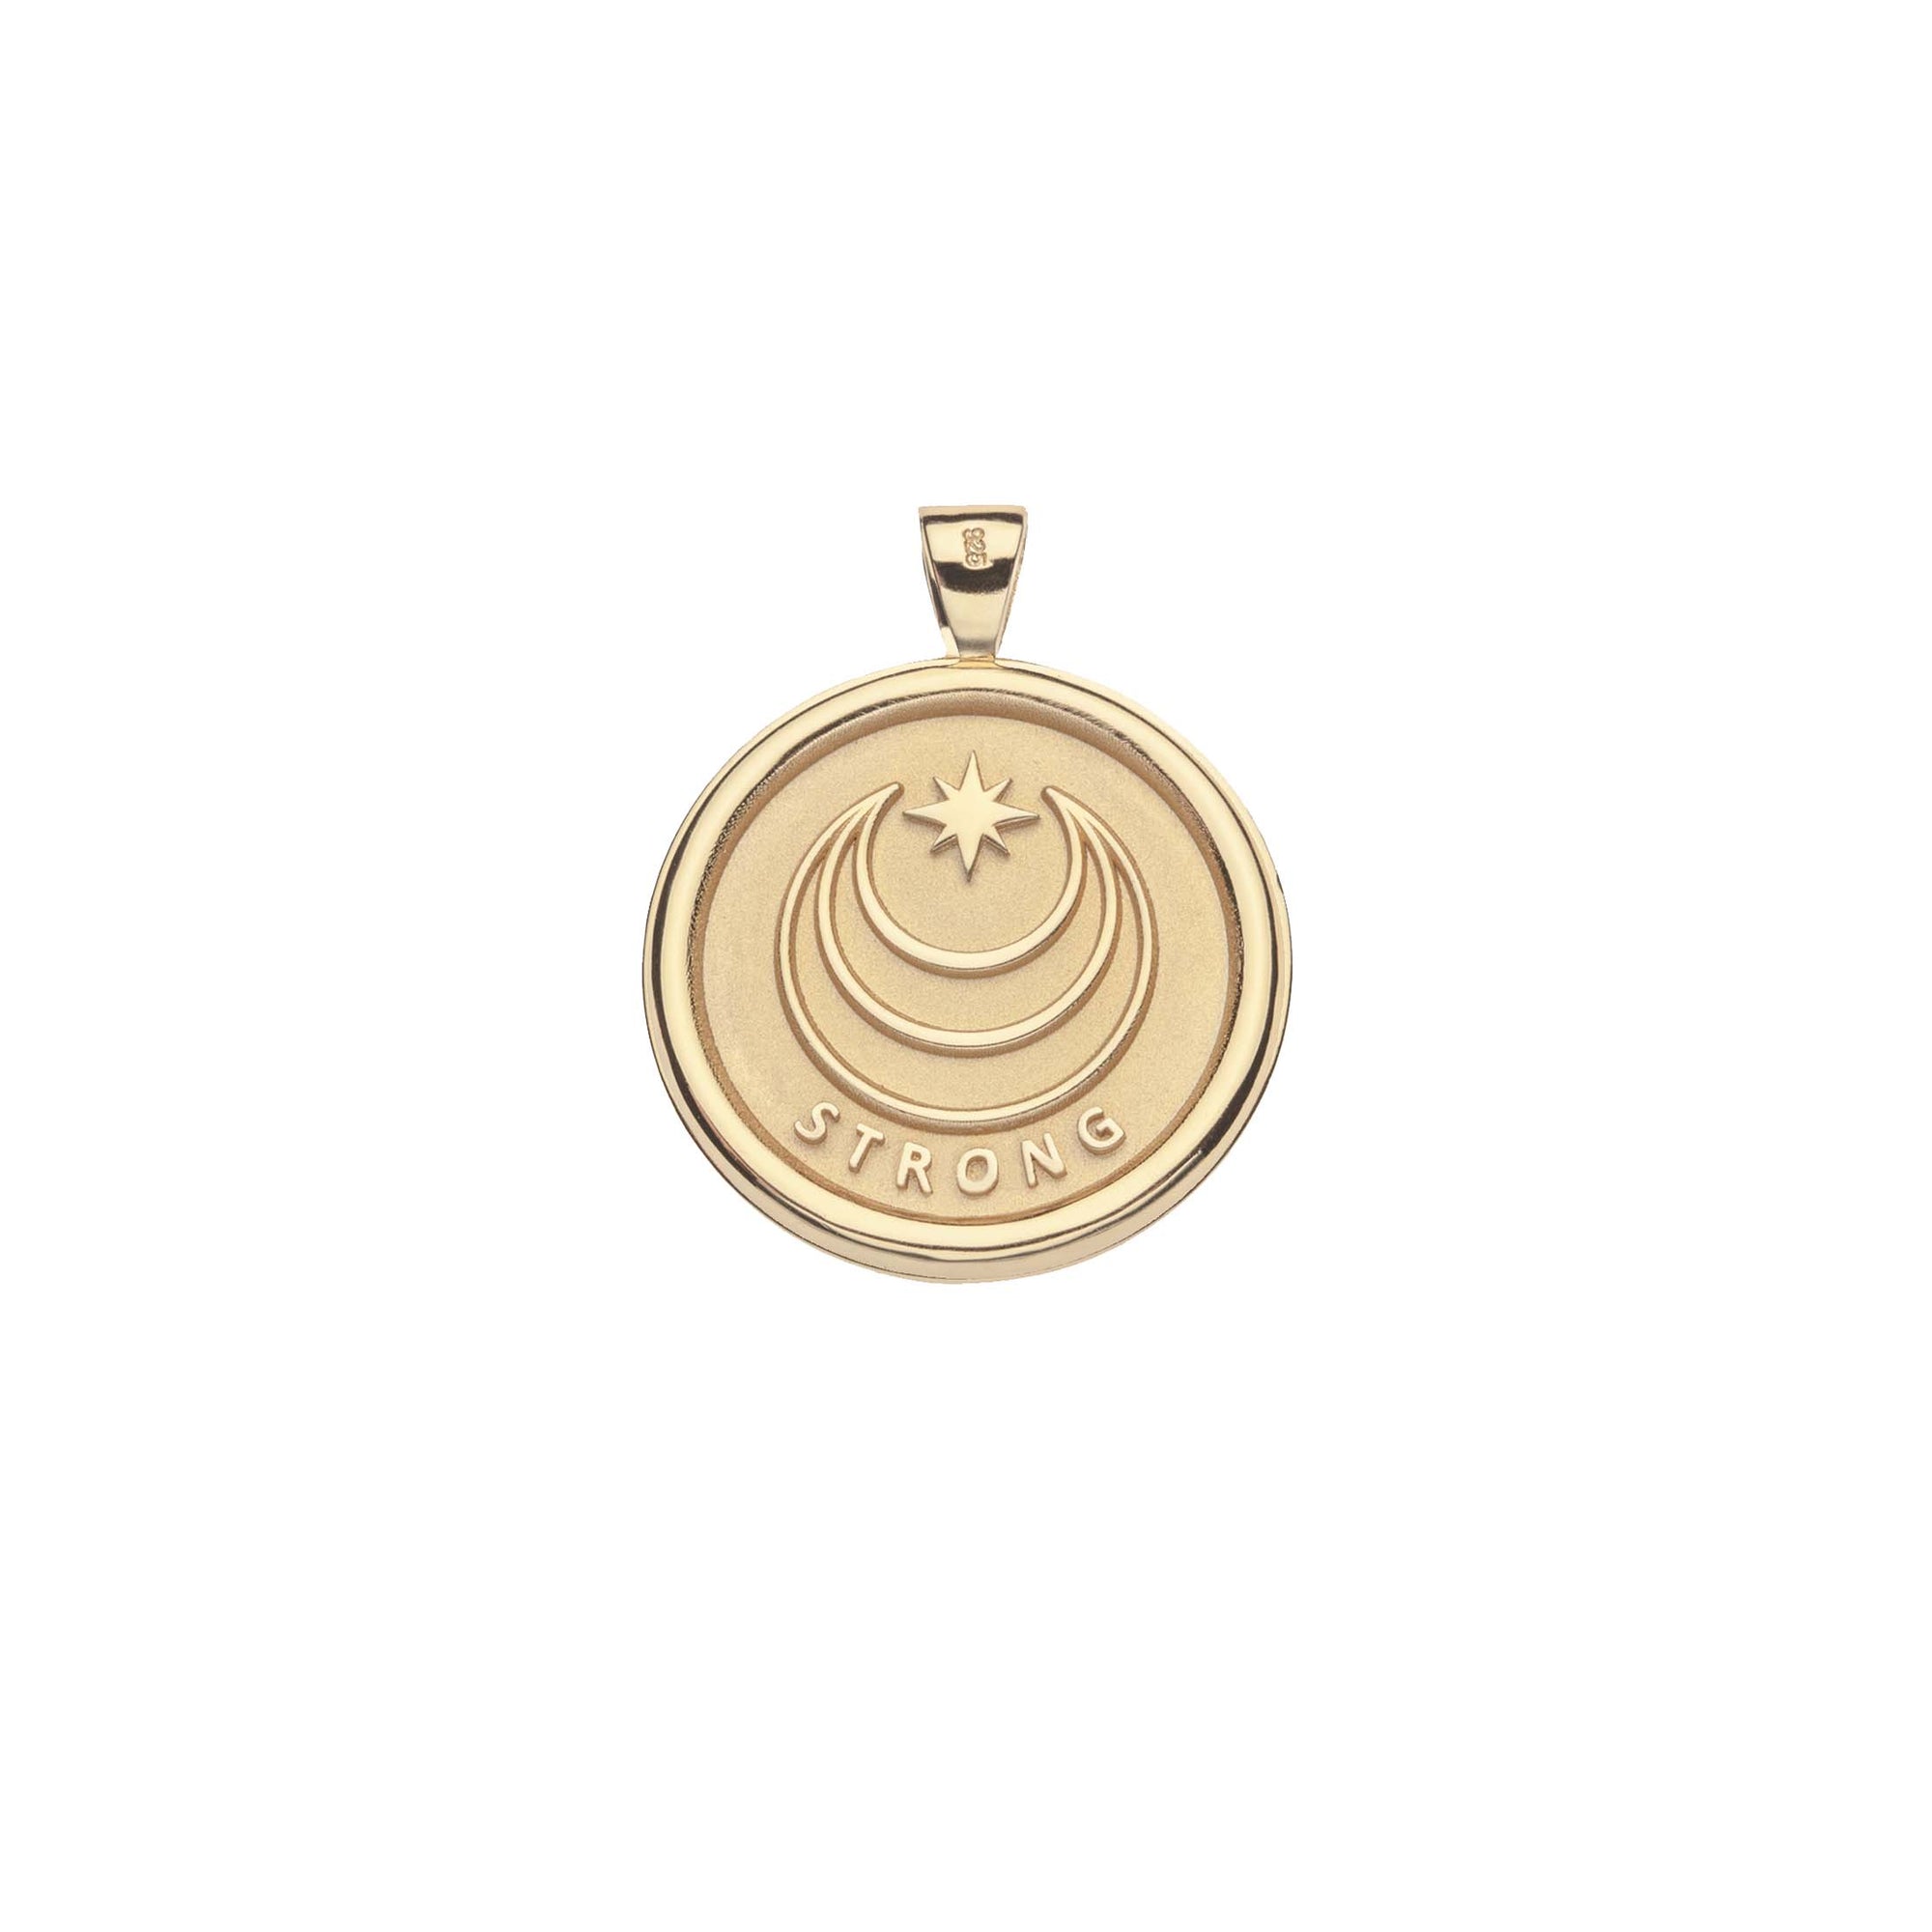 STRONG JW Small Pendant Coin in Solid Gold (Rising Sun)